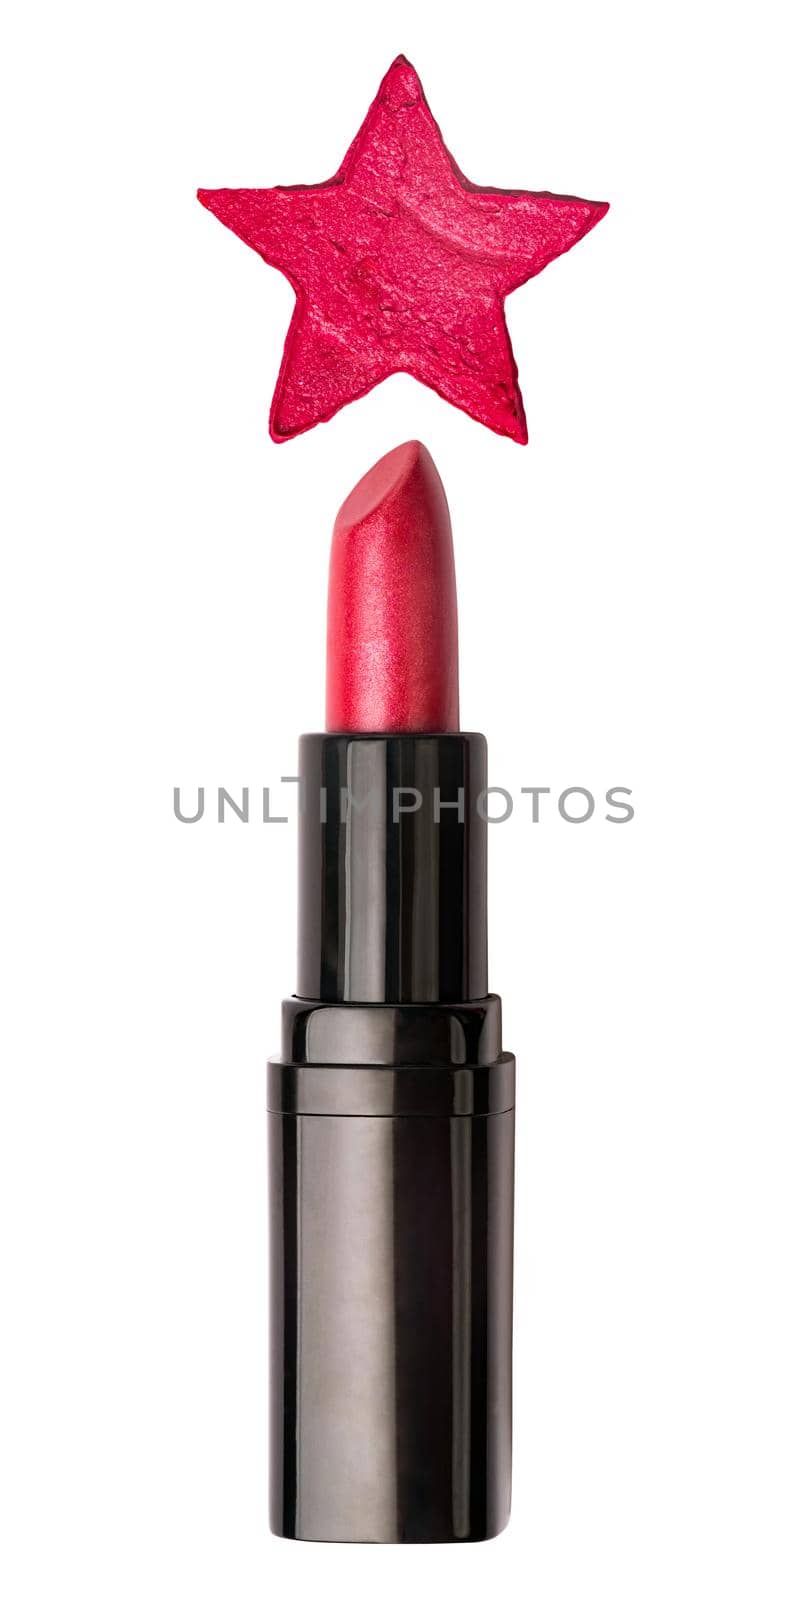 Red lipstick with a lipstick star stroke isolated on a white background by dmitryz